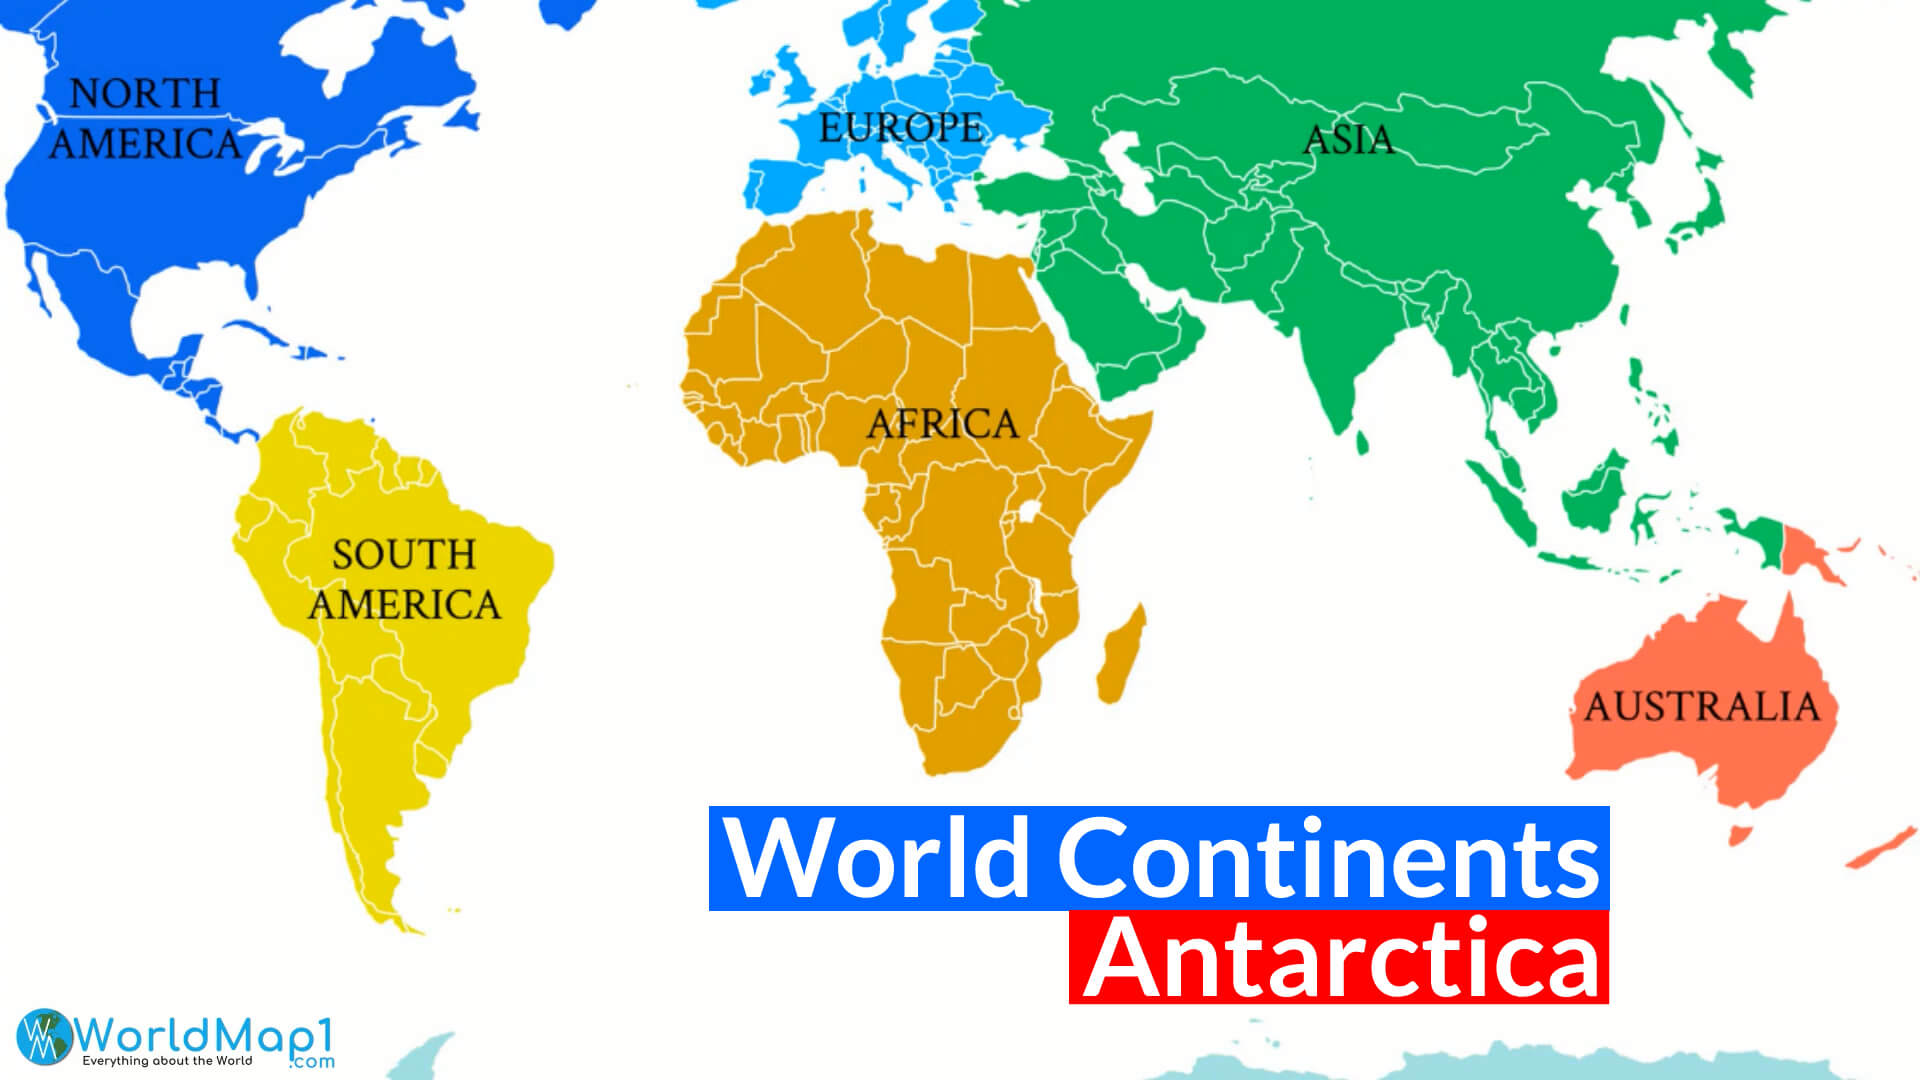 World Continents and Antarctica